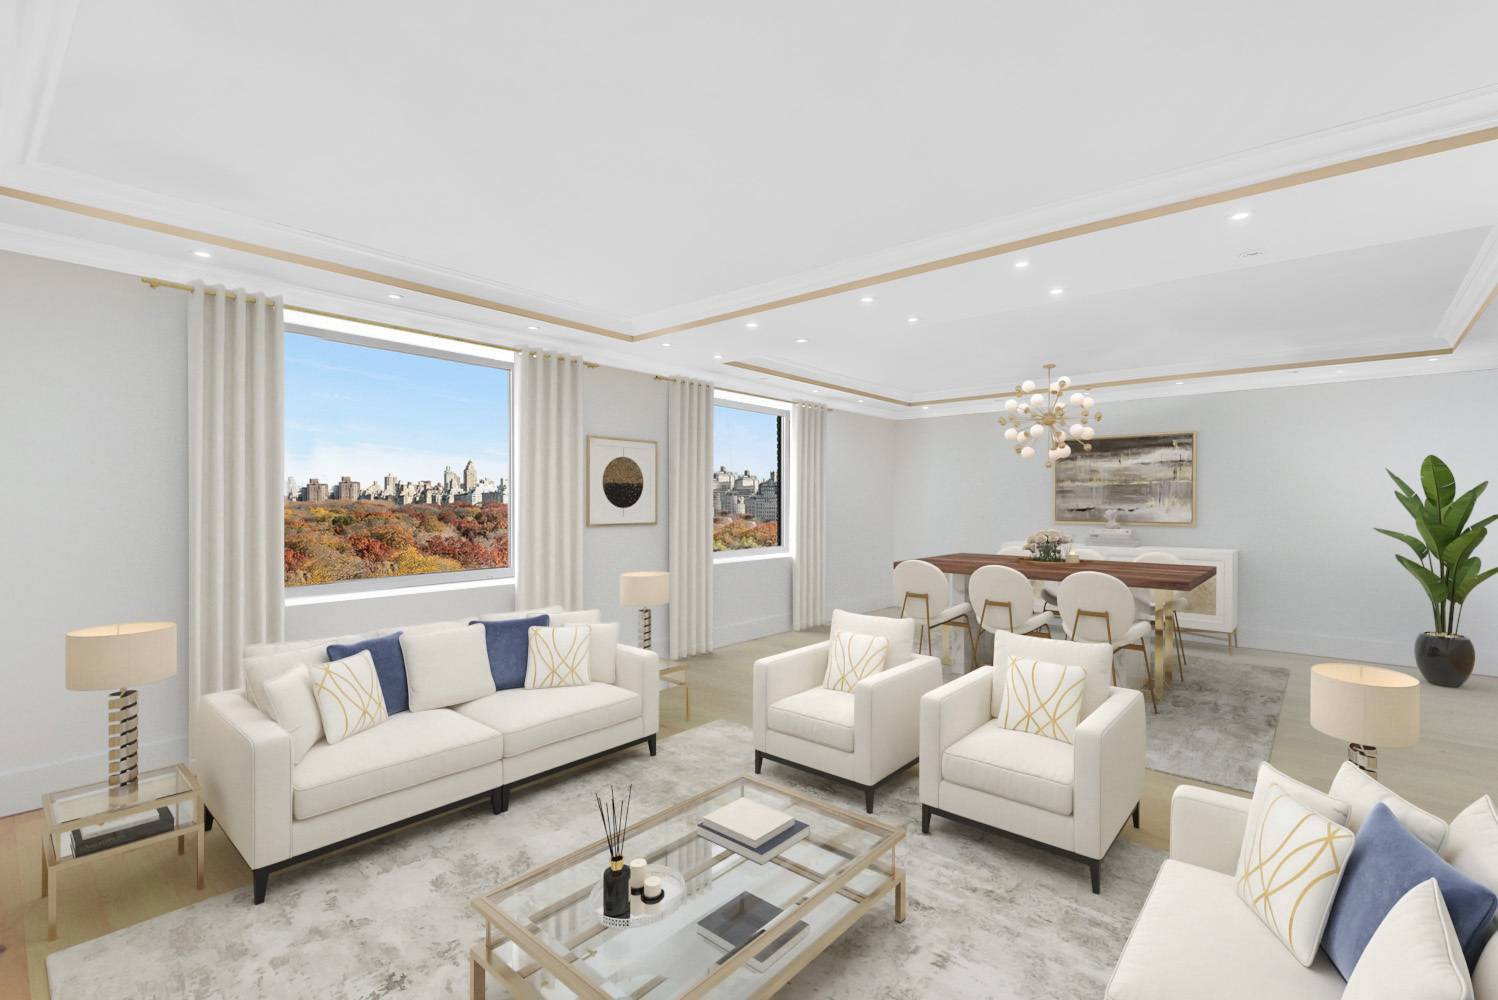 Price improvement for this fully renovated Central Park South apartment.